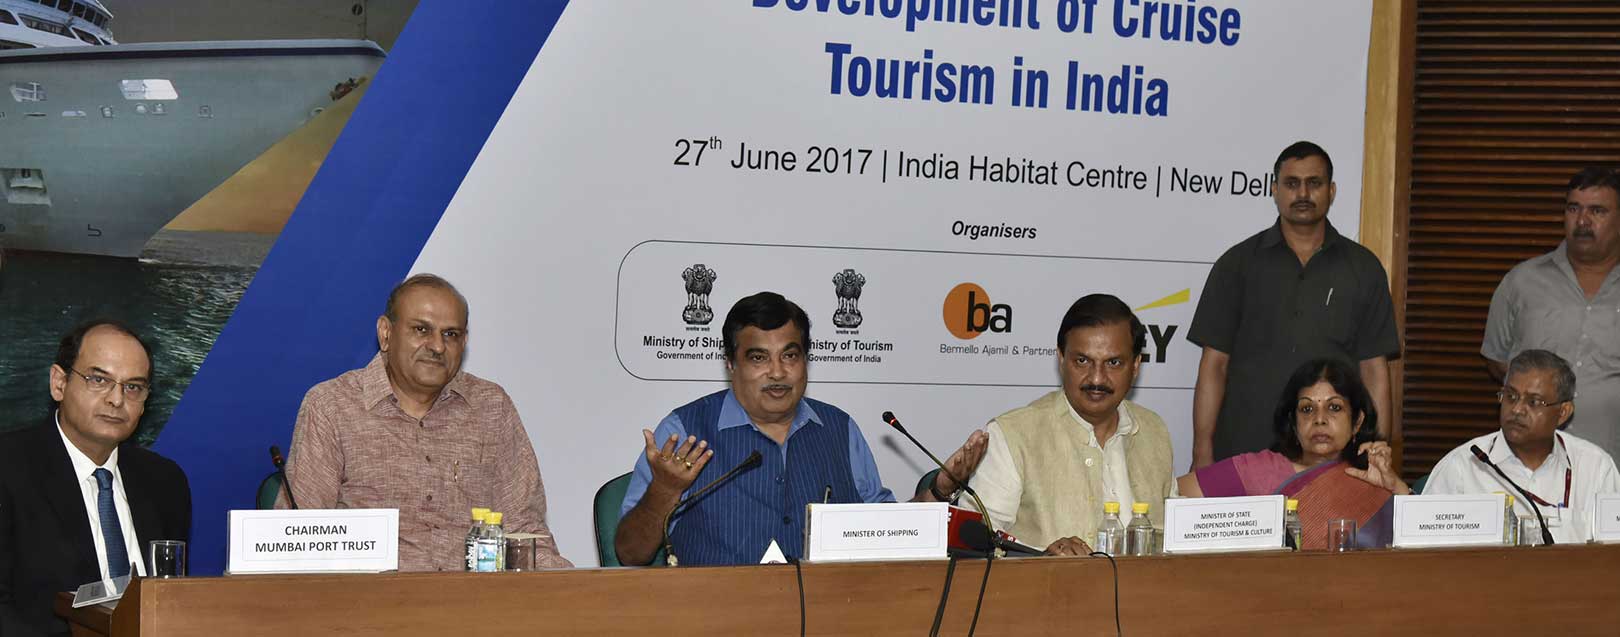 Cruise tourism can be a major growth driver for Indian economy, Gadkari